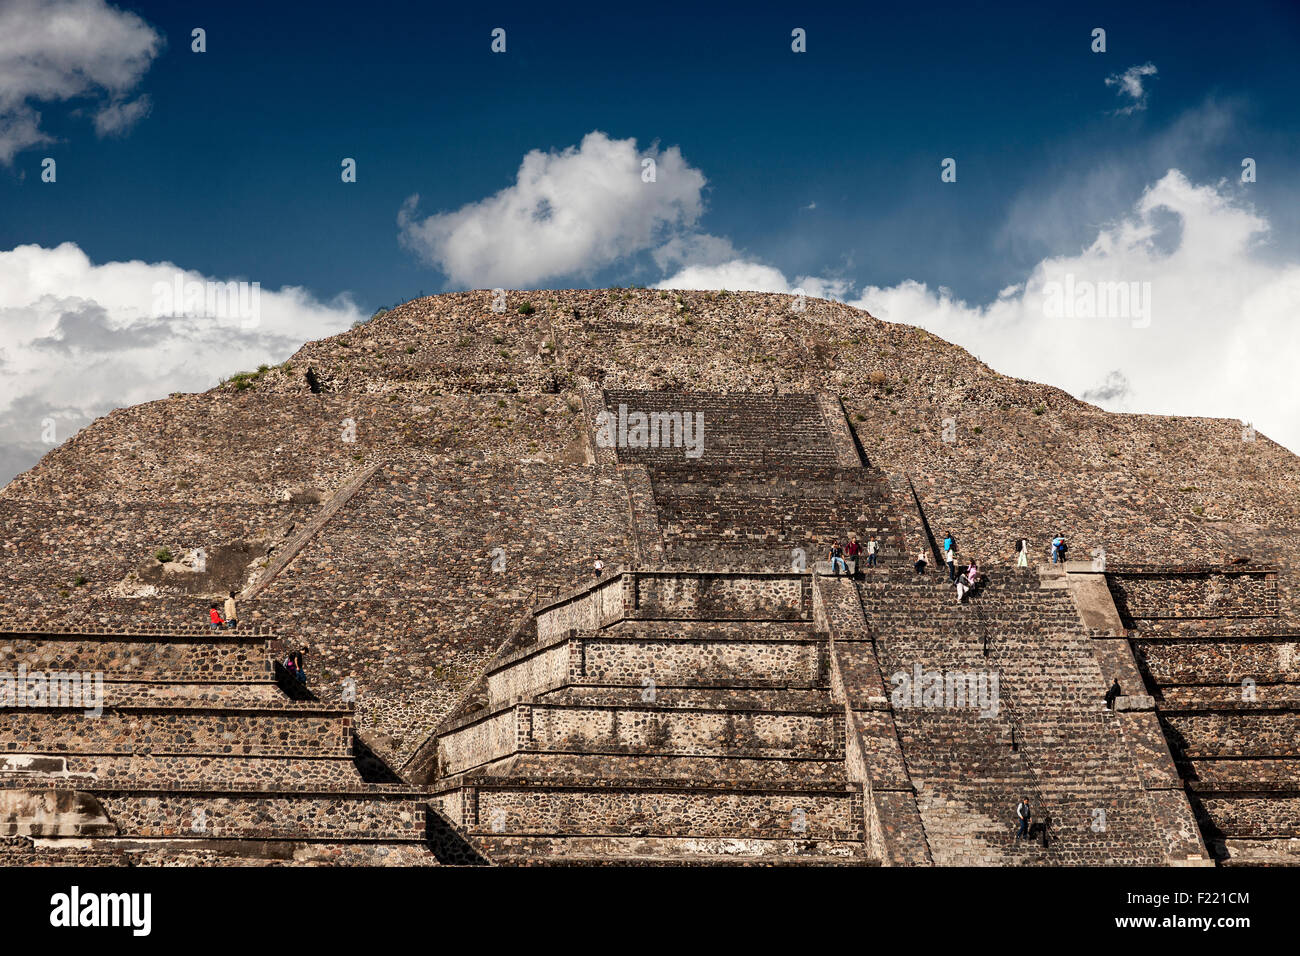 Pyramid of the Moon Teotihuacan archaeological site Unesco World Heritage Site Mexico America Stock Photo